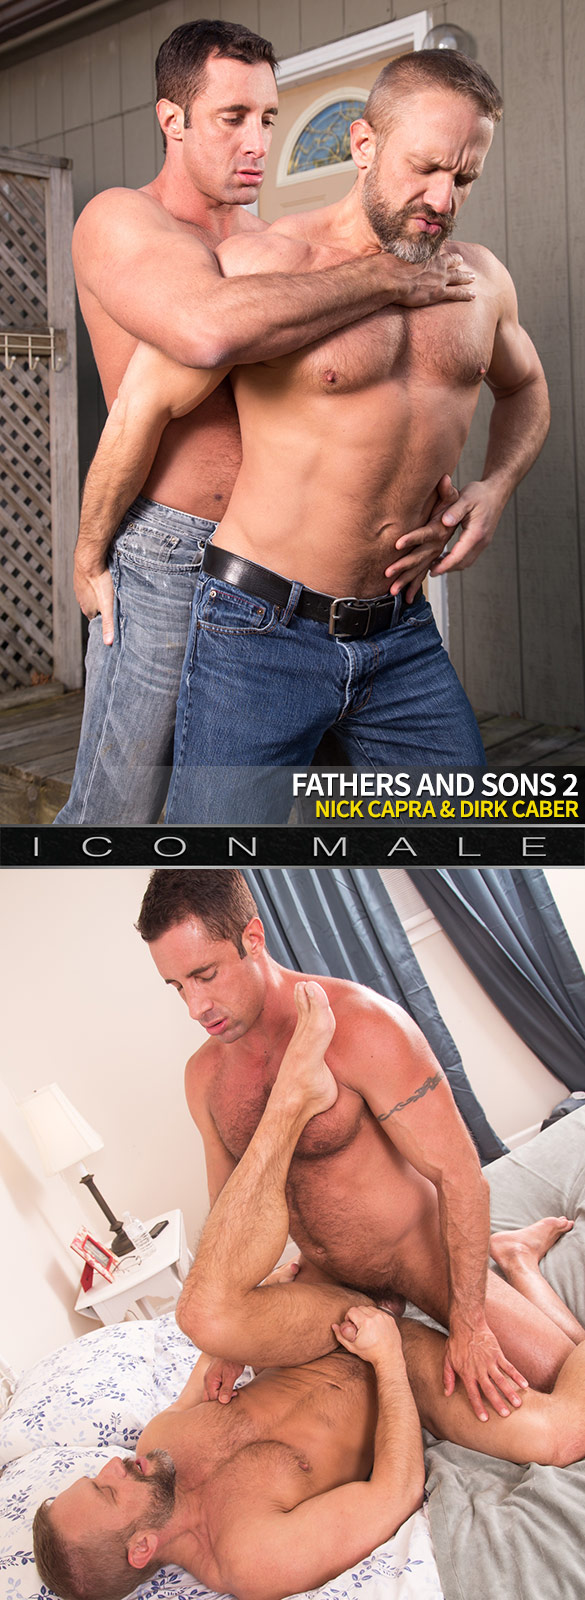 IconMale: Nick Capra fucks Dirk Caber in "Fathers and Sons 2"